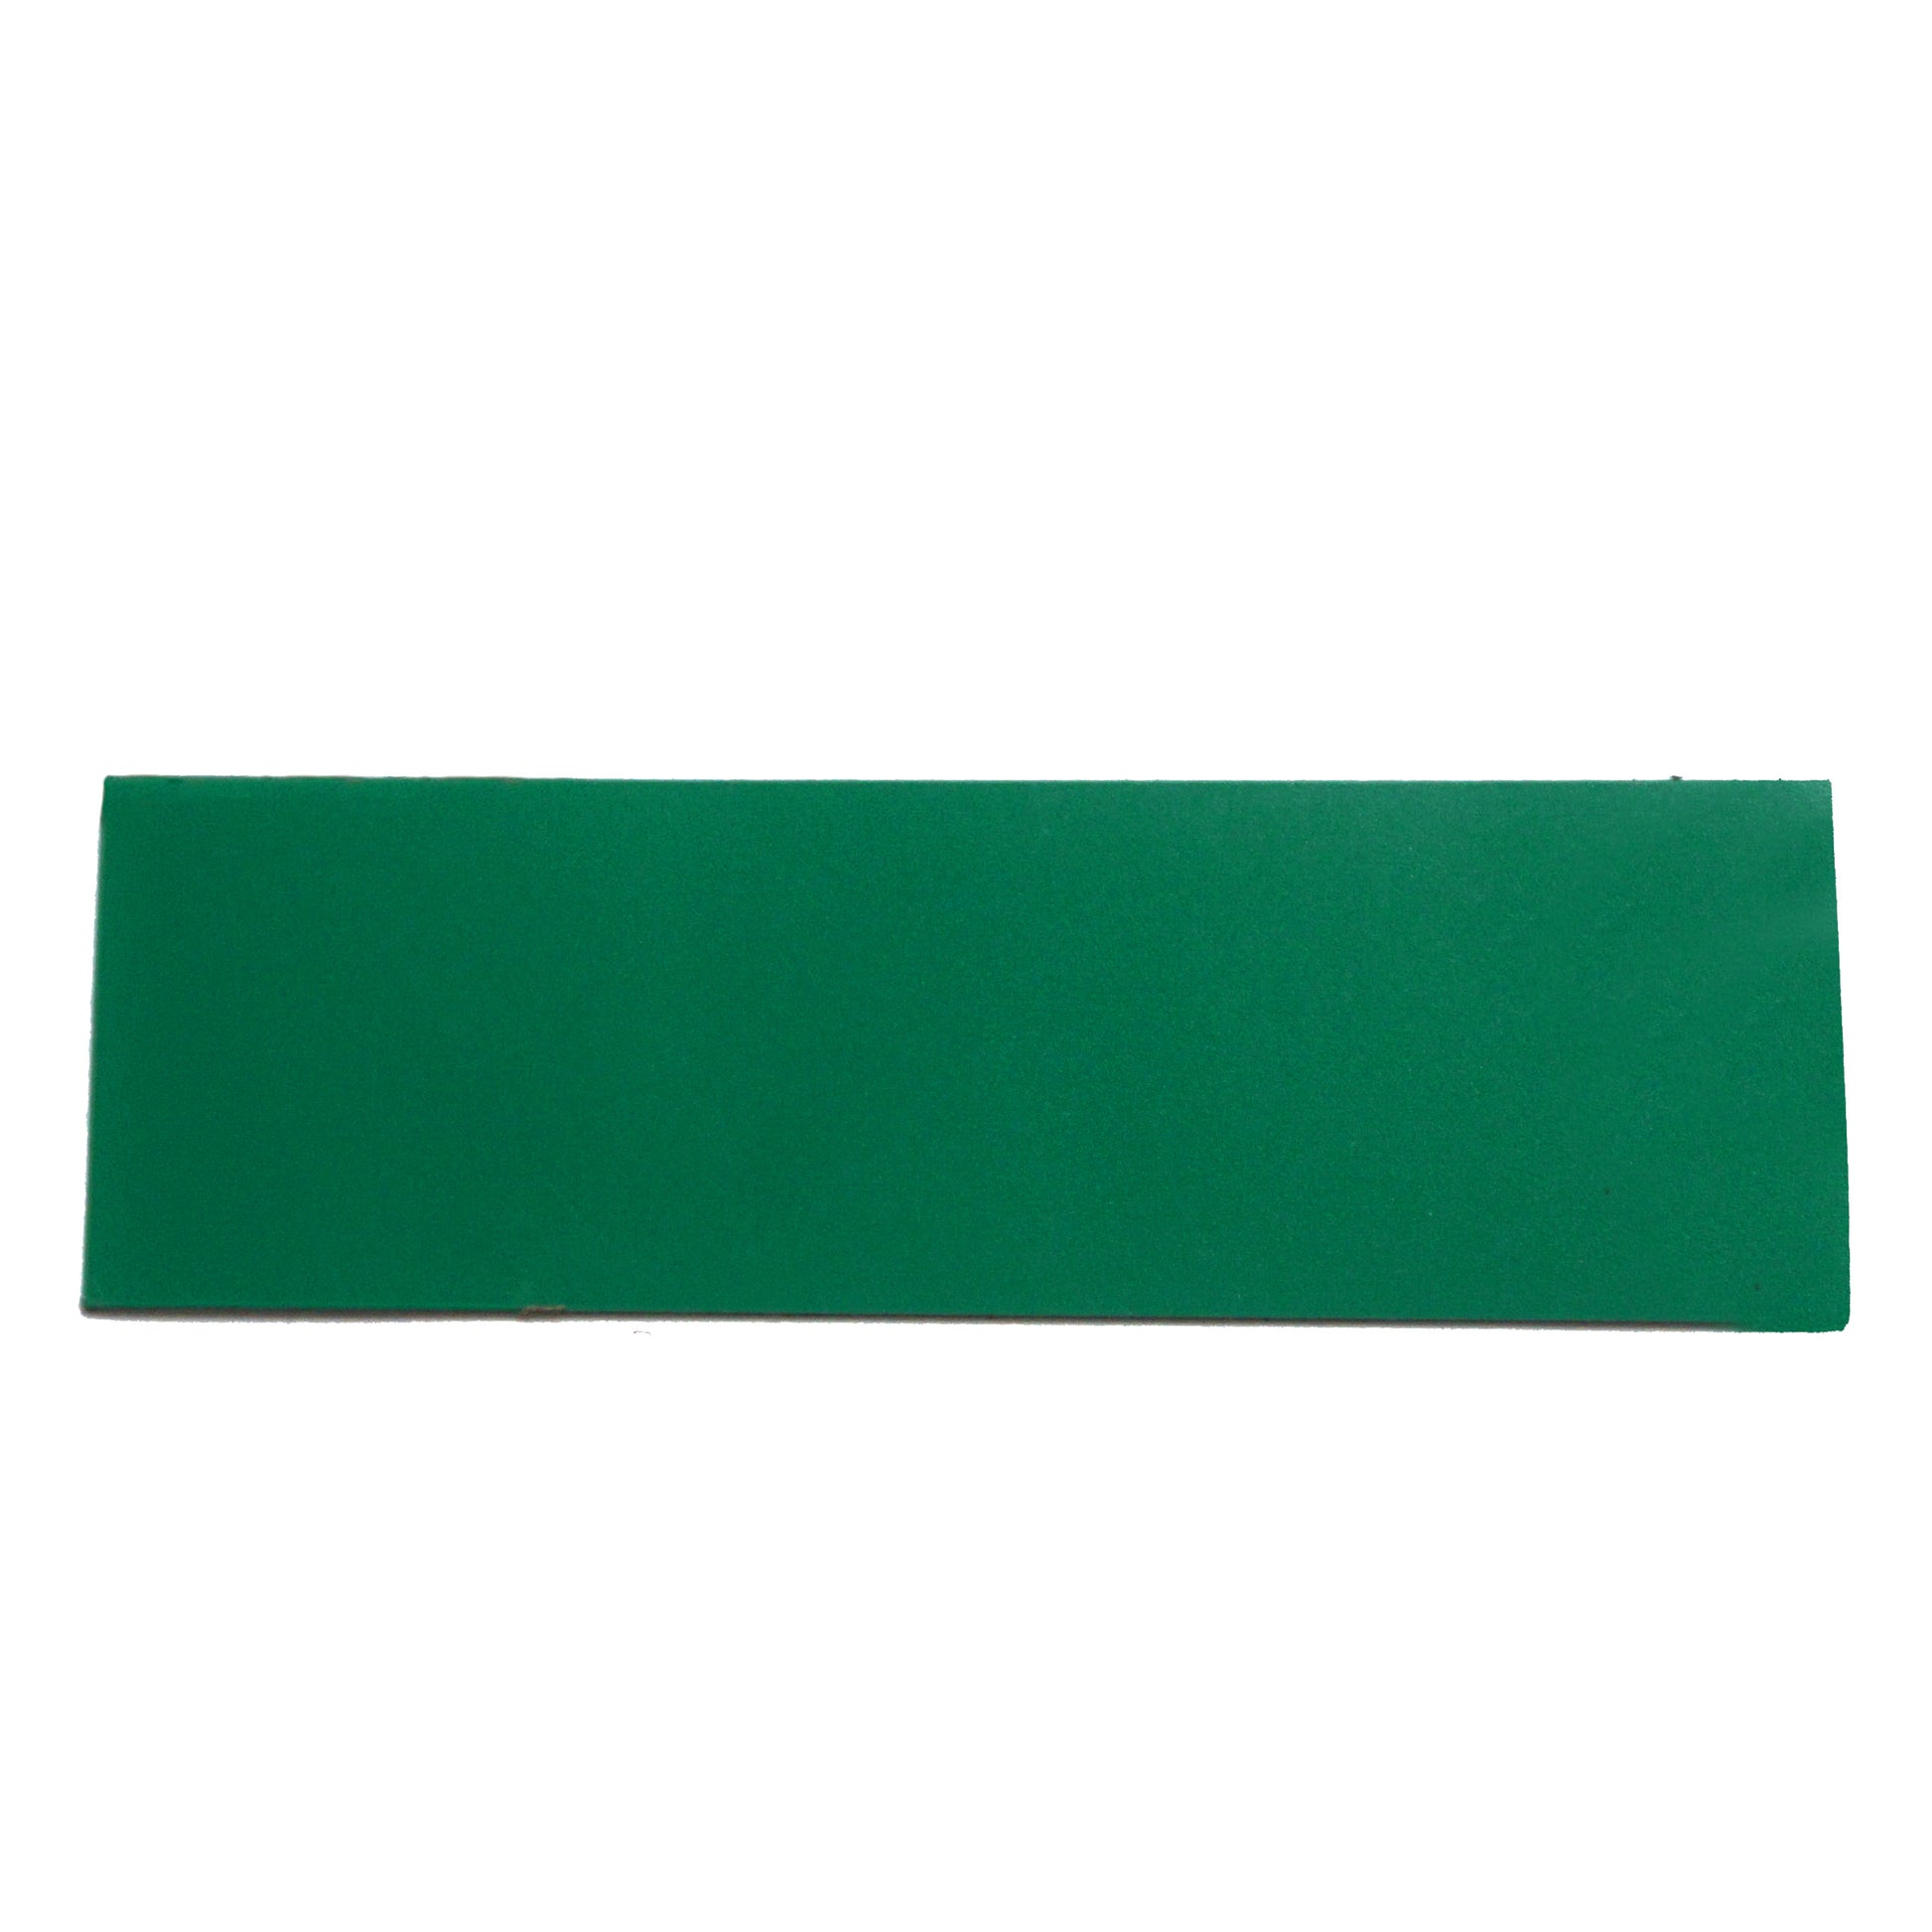 Load image into Gallery viewer, ZGN03040GR/WKS50 Magnetic Labeling Strip w/ Green Vinyl Surface - Top View